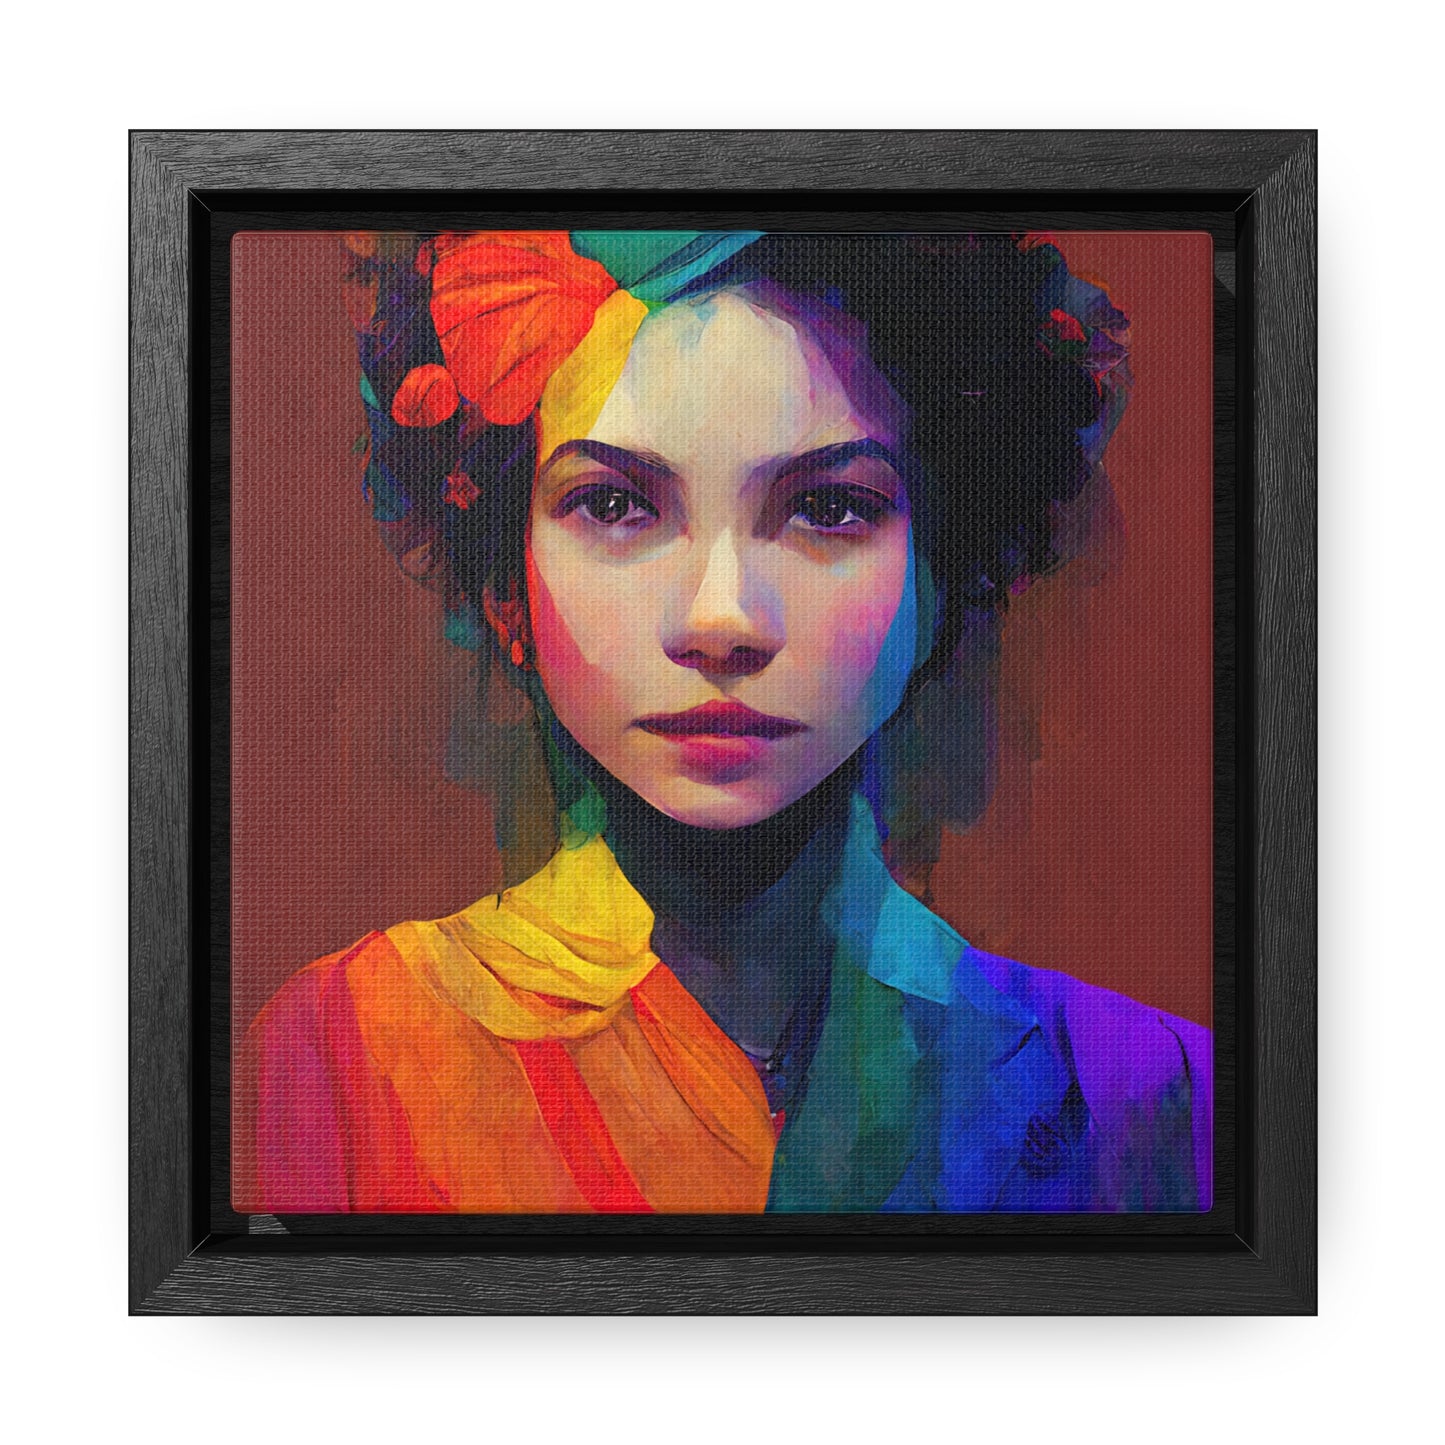 Lady's faces 15, Valentinii, Gallery Canvas Wraps, Square Frame